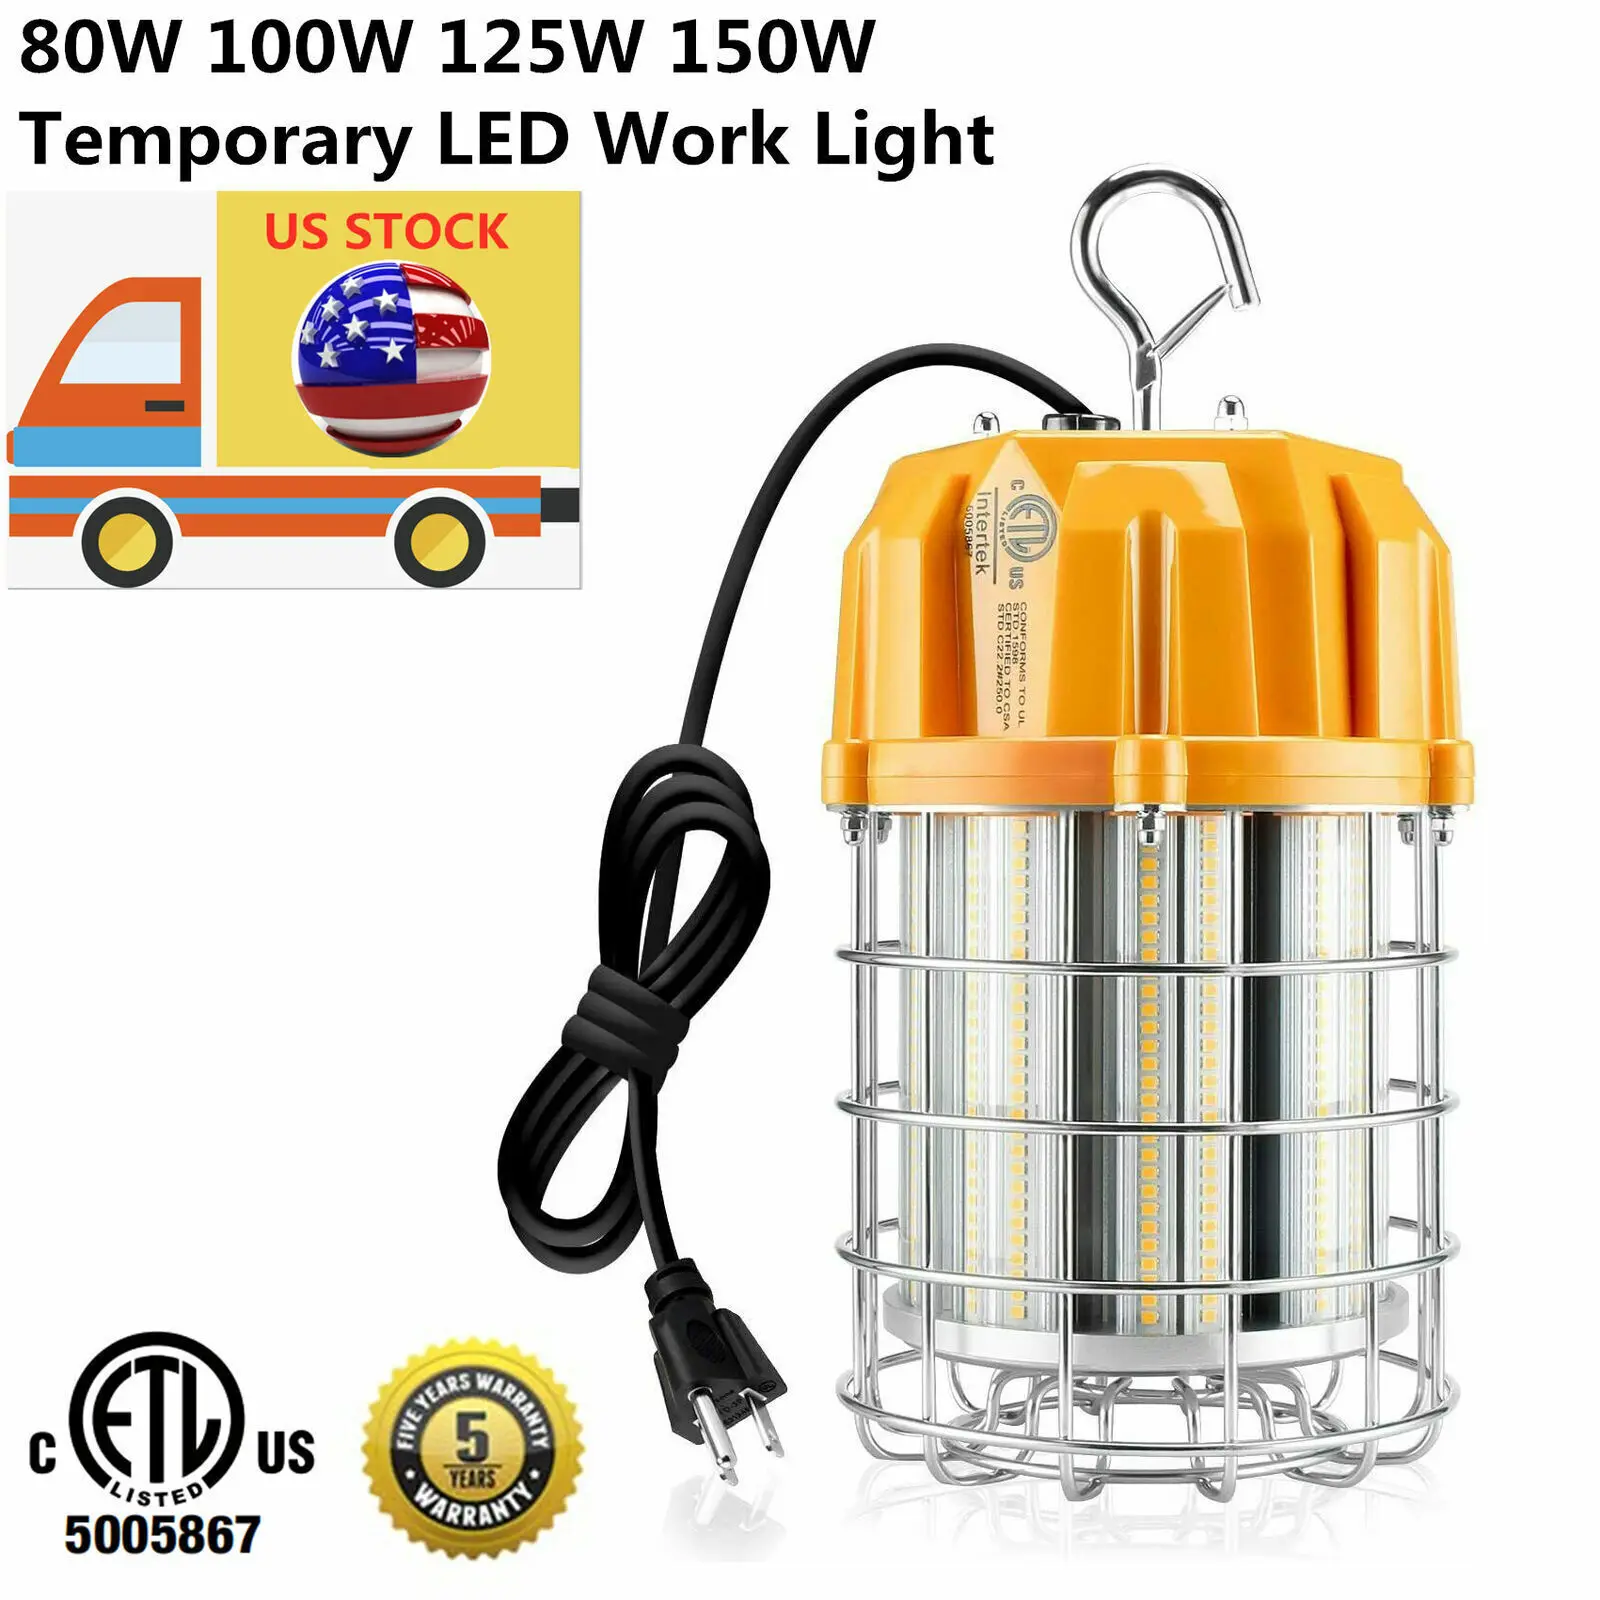 

80W 100W 150W LED Temporary Work Light, Portable Hanging Work Construction Light with Hook 5000K, Indoor Mine Job Site Lighting